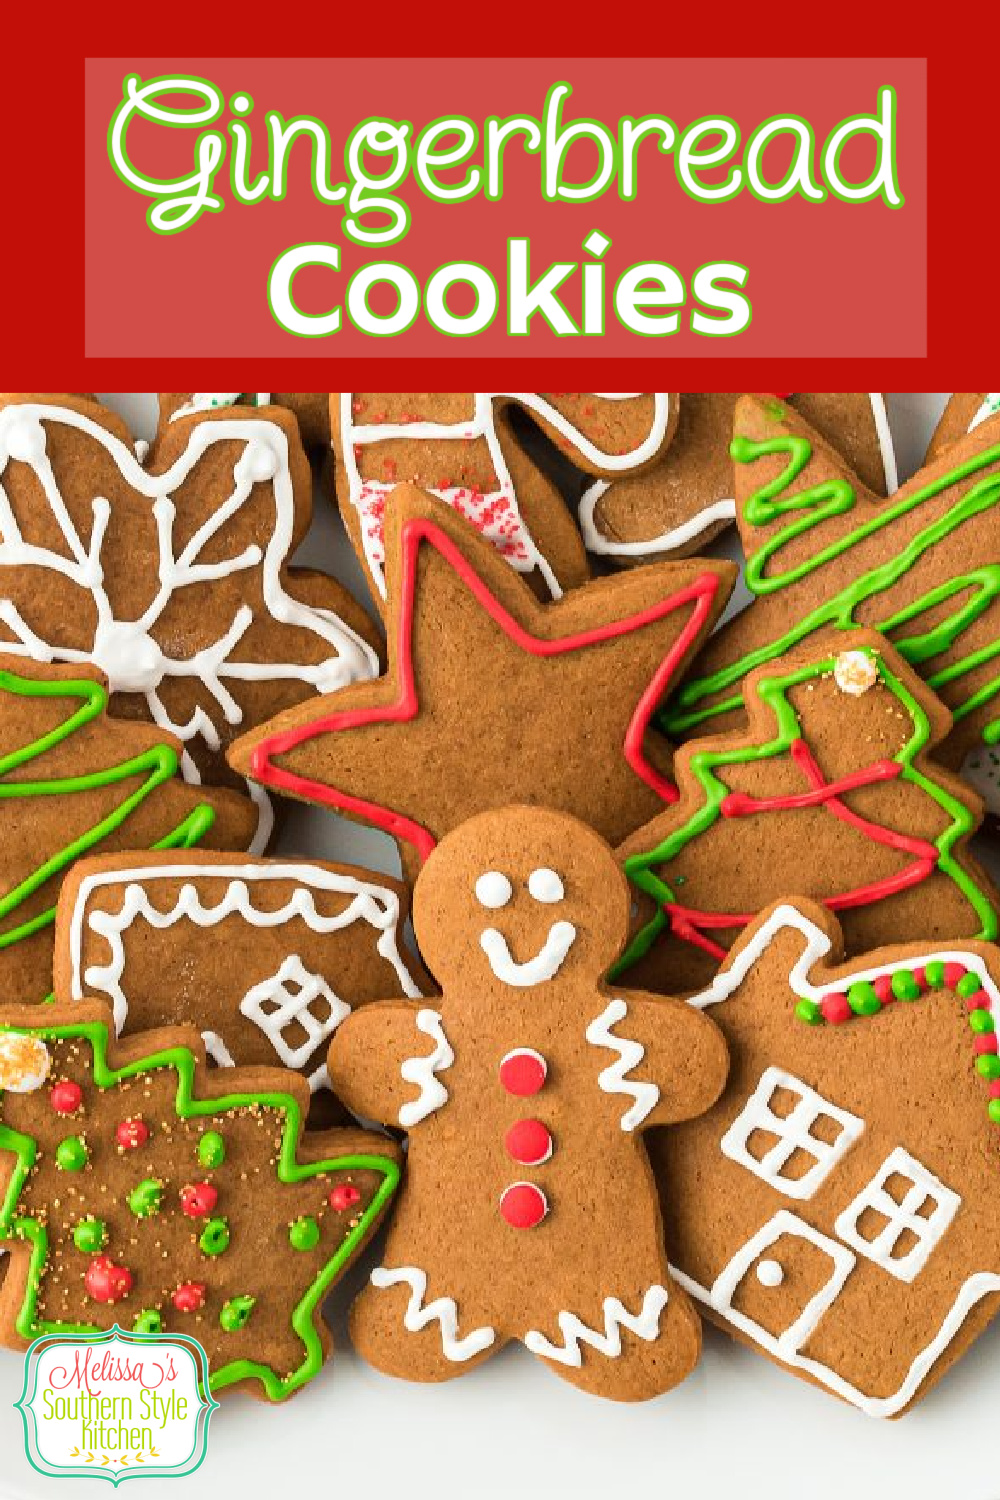 Make this classic Gingerbread Cookies Recipe to share with family and friends for the holidays #gingerbreadcookies #classicgingerbreadcookies #cookierecipes #christmascookies #cookies #holidaybaking #gingerbreadmen #cookieswap